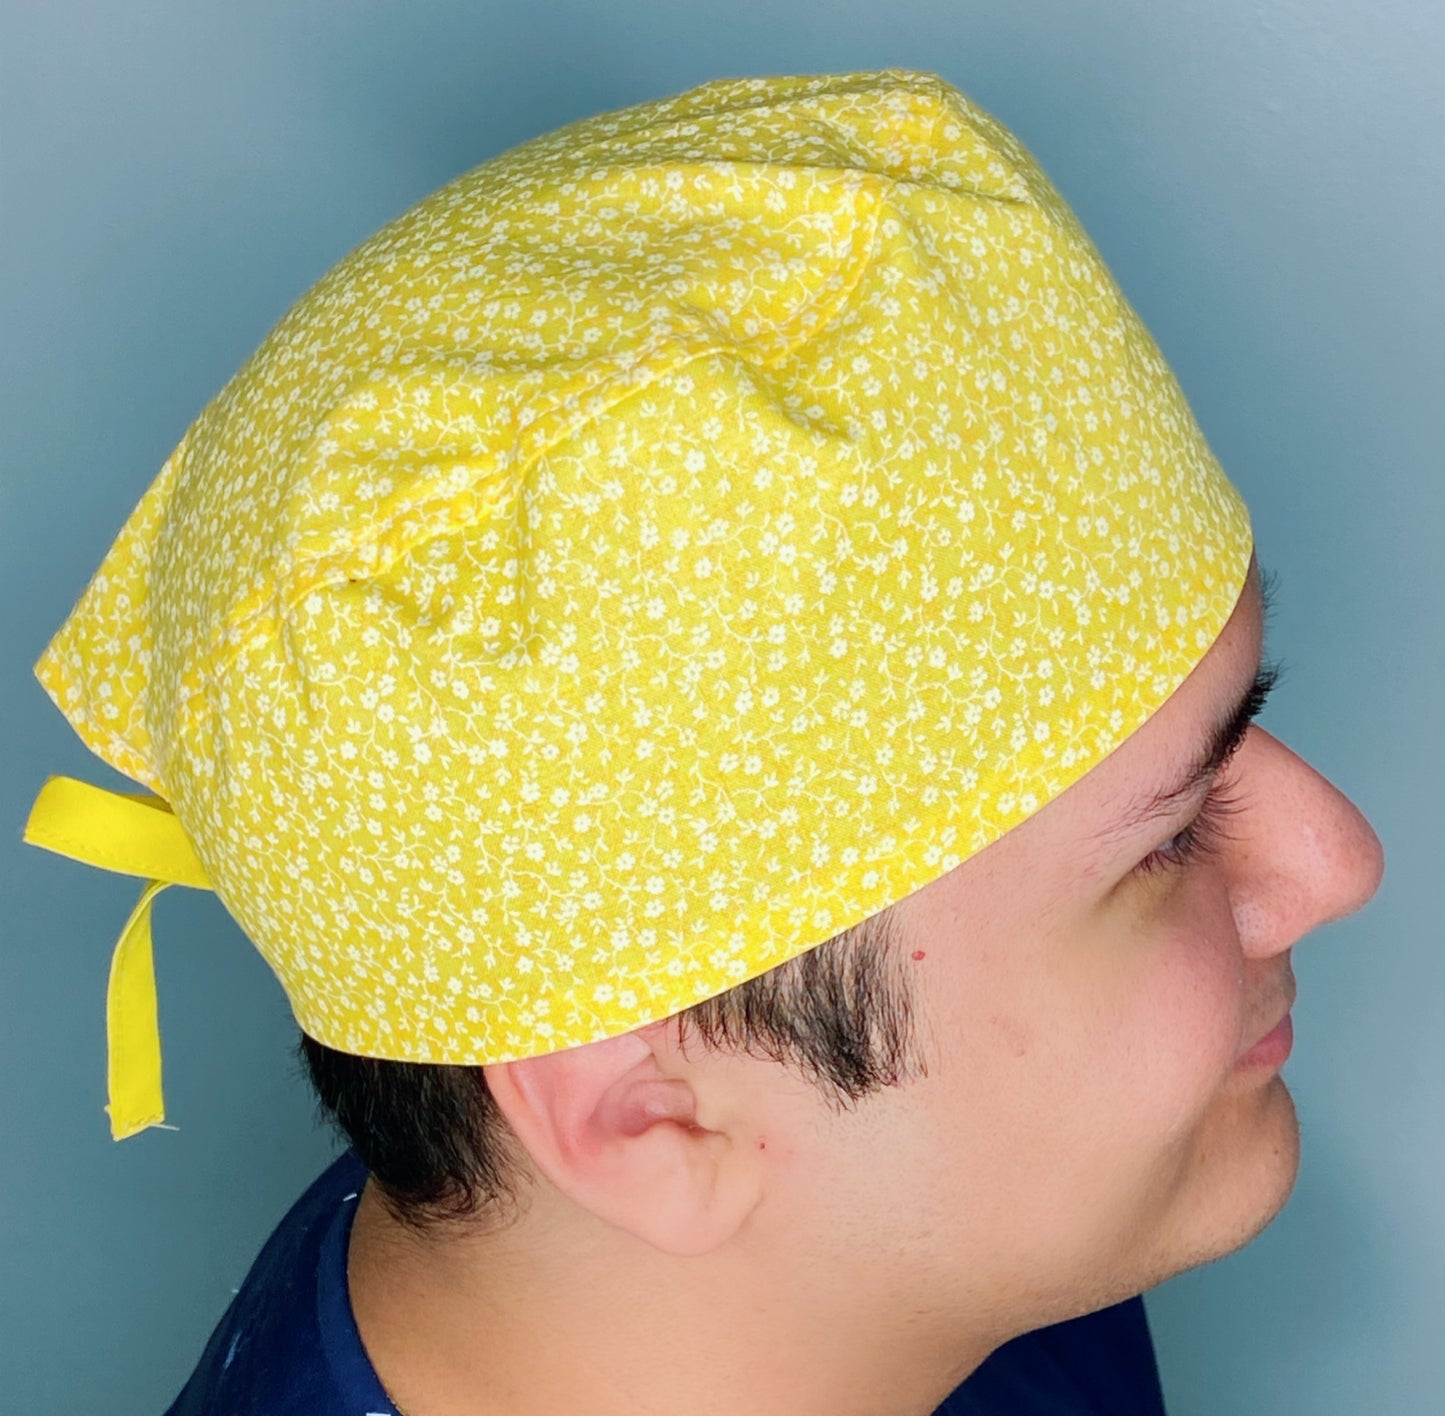 Small White Flowers on Yellow Floral Design Unisex Cute Scrub Cap